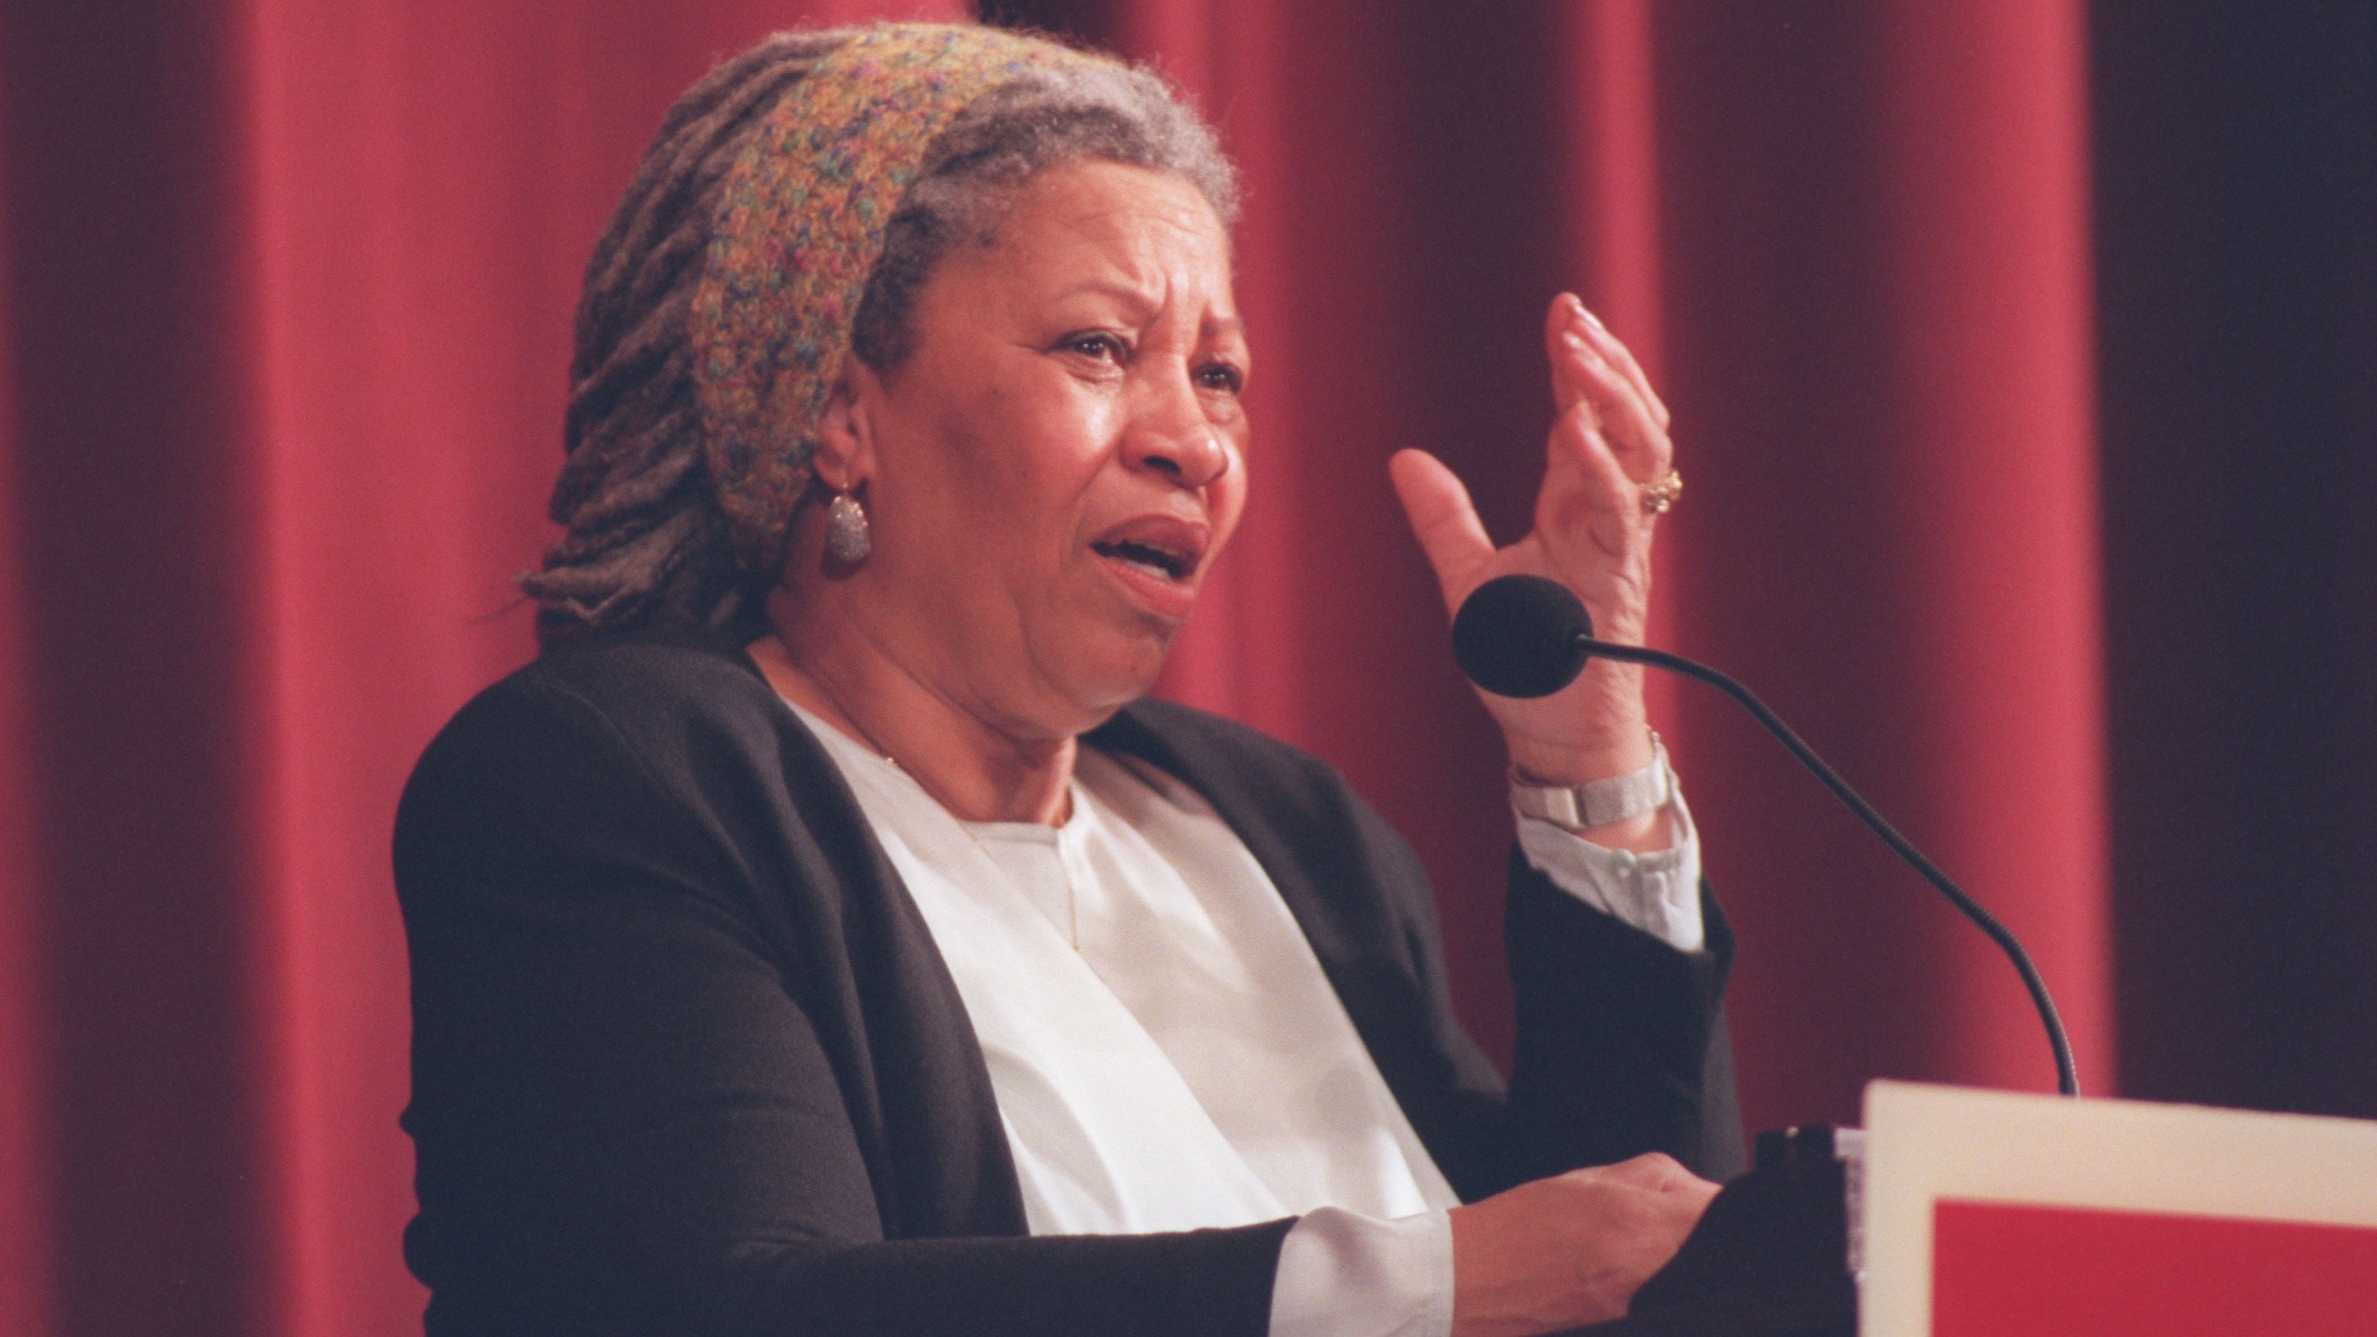 More than peace: How Toni Morrison urged us to fight for something bigger than war